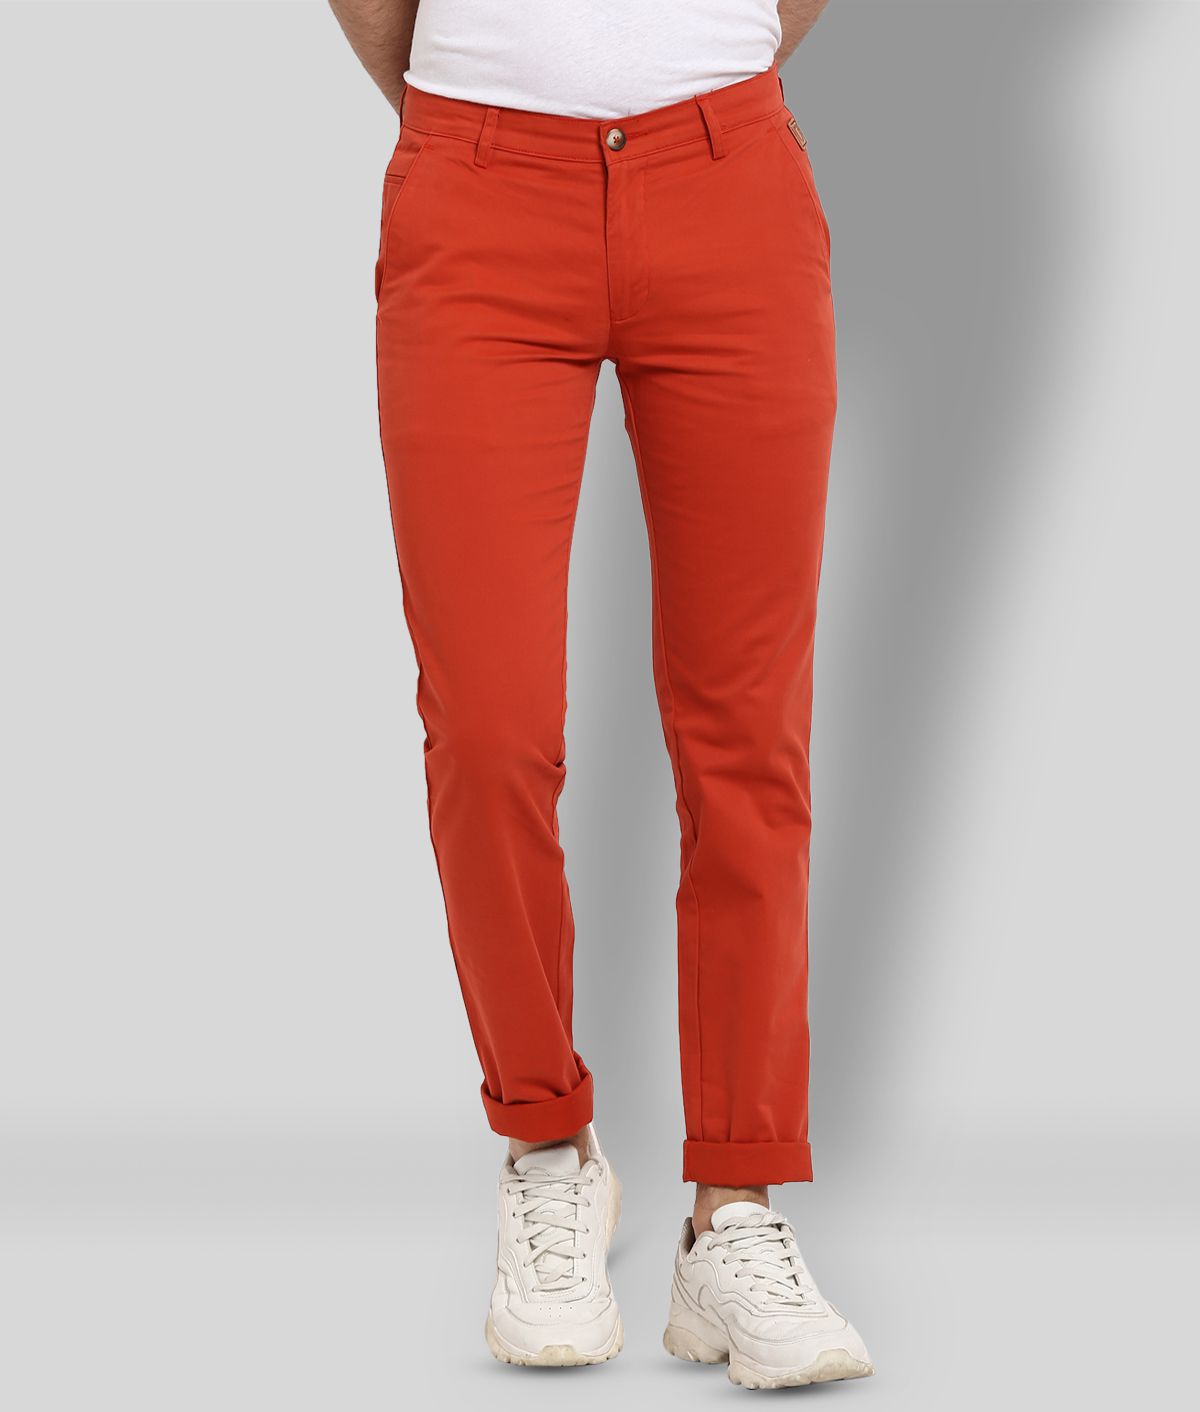     			Urbano Fashion - Red Cotton Slim Fit Men's Chinos (Pack of 1)